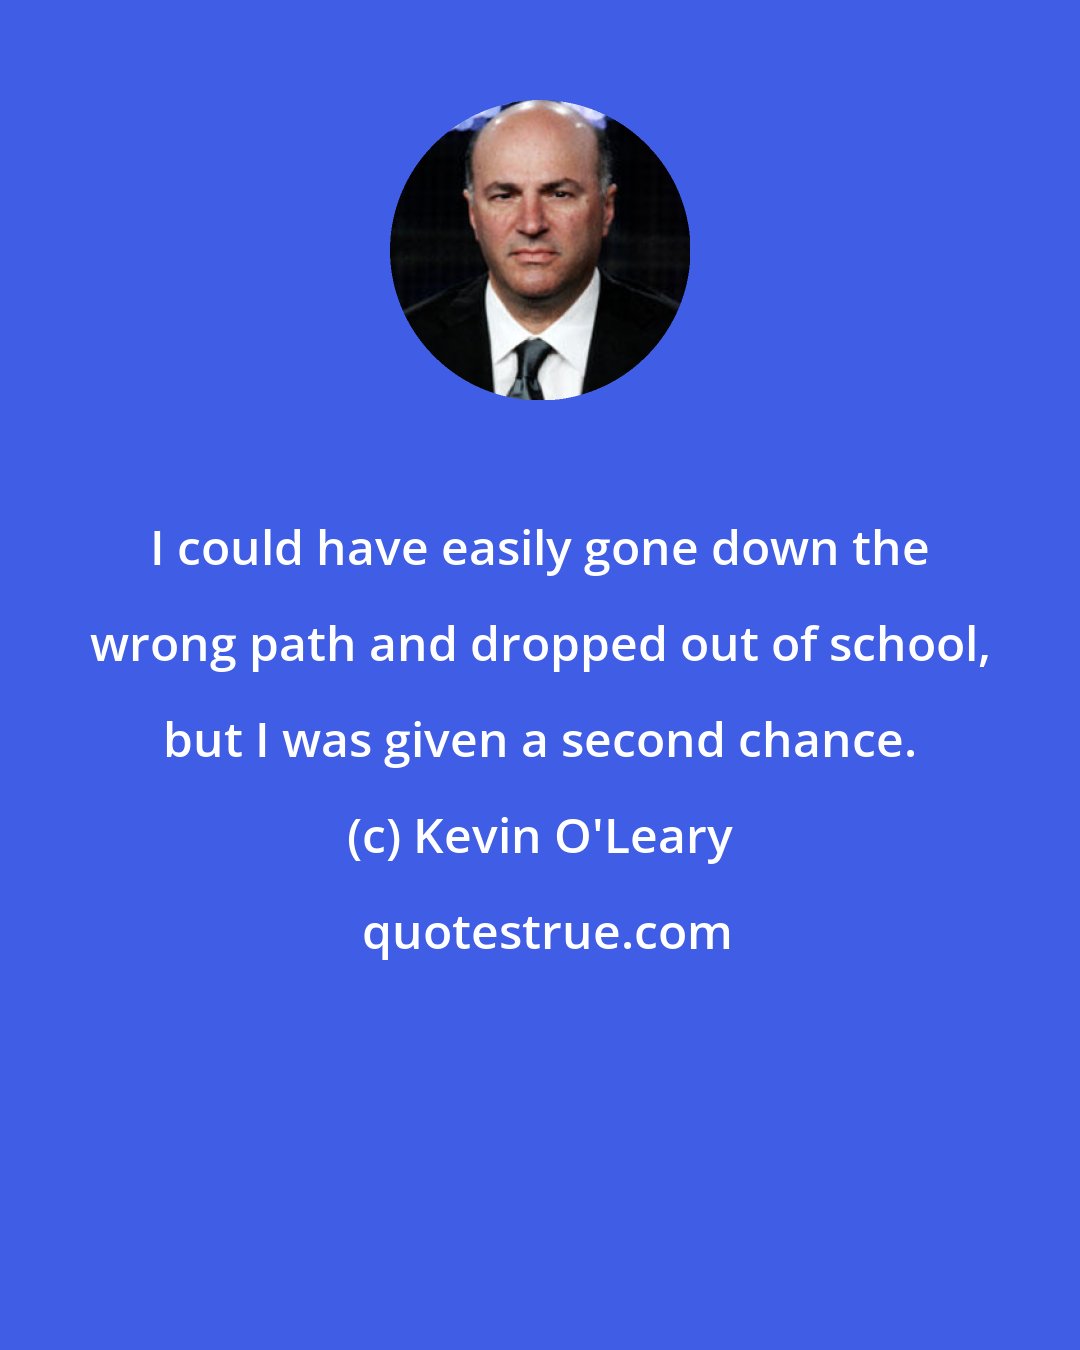 Kevin O'Leary: I could have easily gone down the wrong path and dropped out of school, but I was given a second chance.